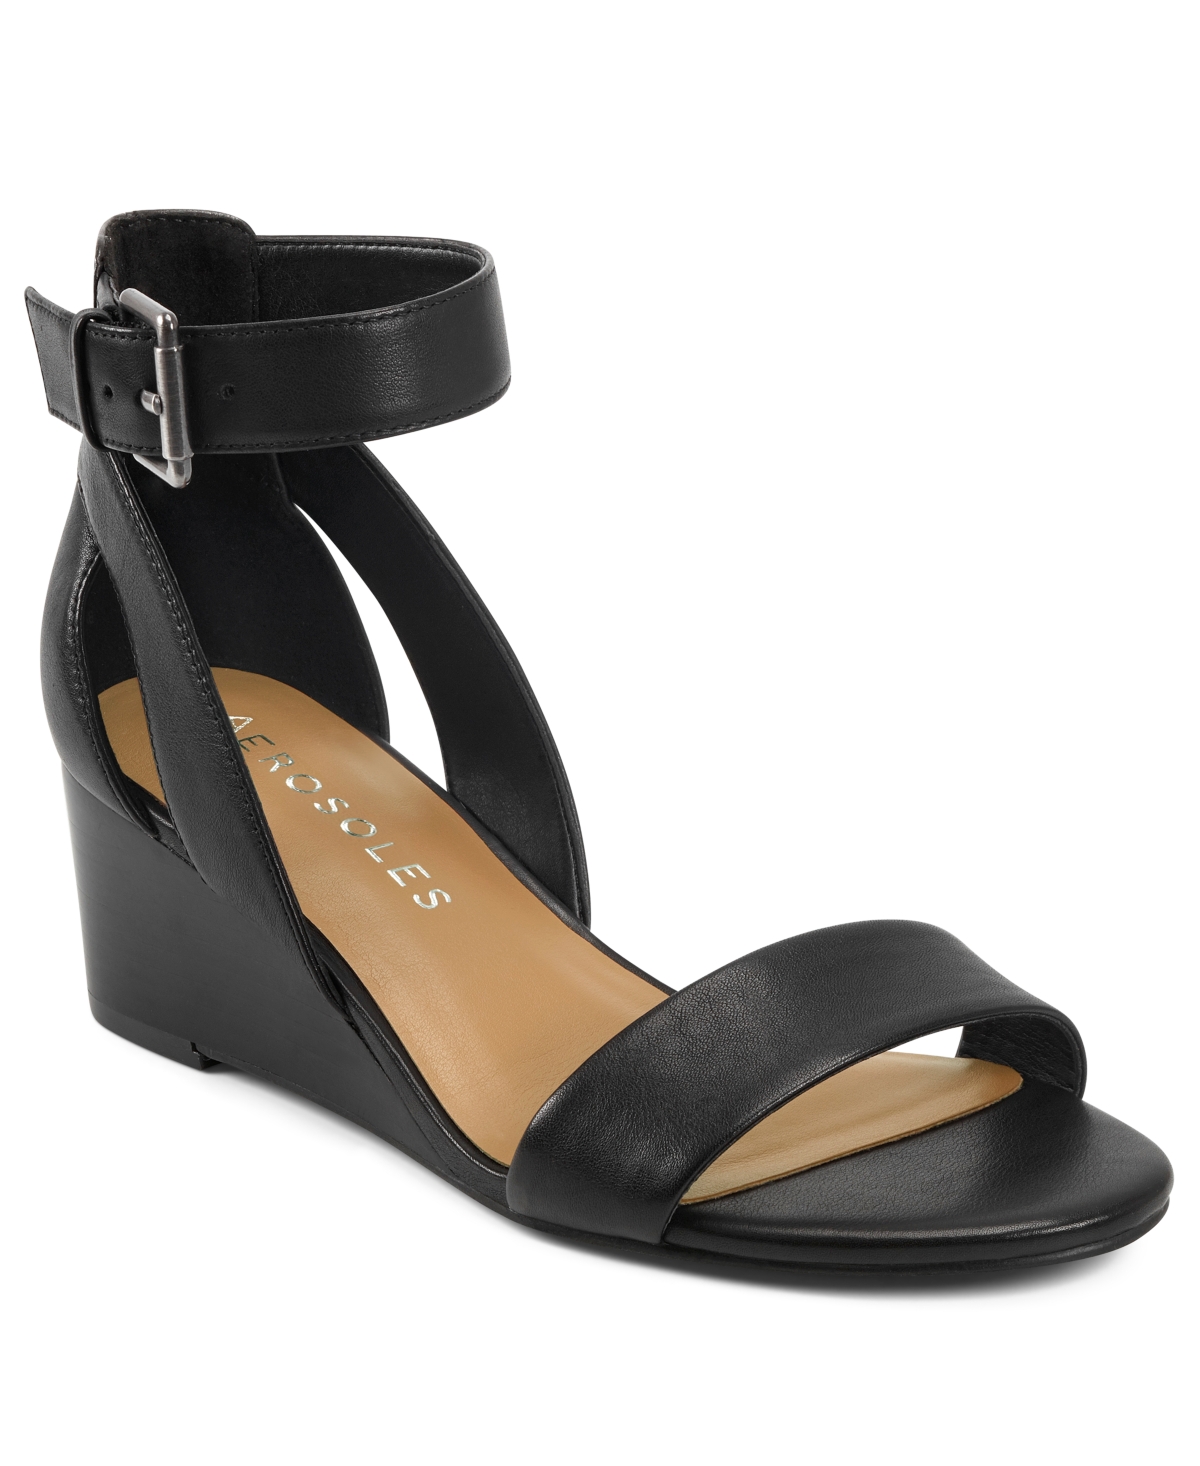 UPC 887039887518 product image for Aerosoles Willowbrook Wedge Sandals Women's Shoes | upcitemdb.com